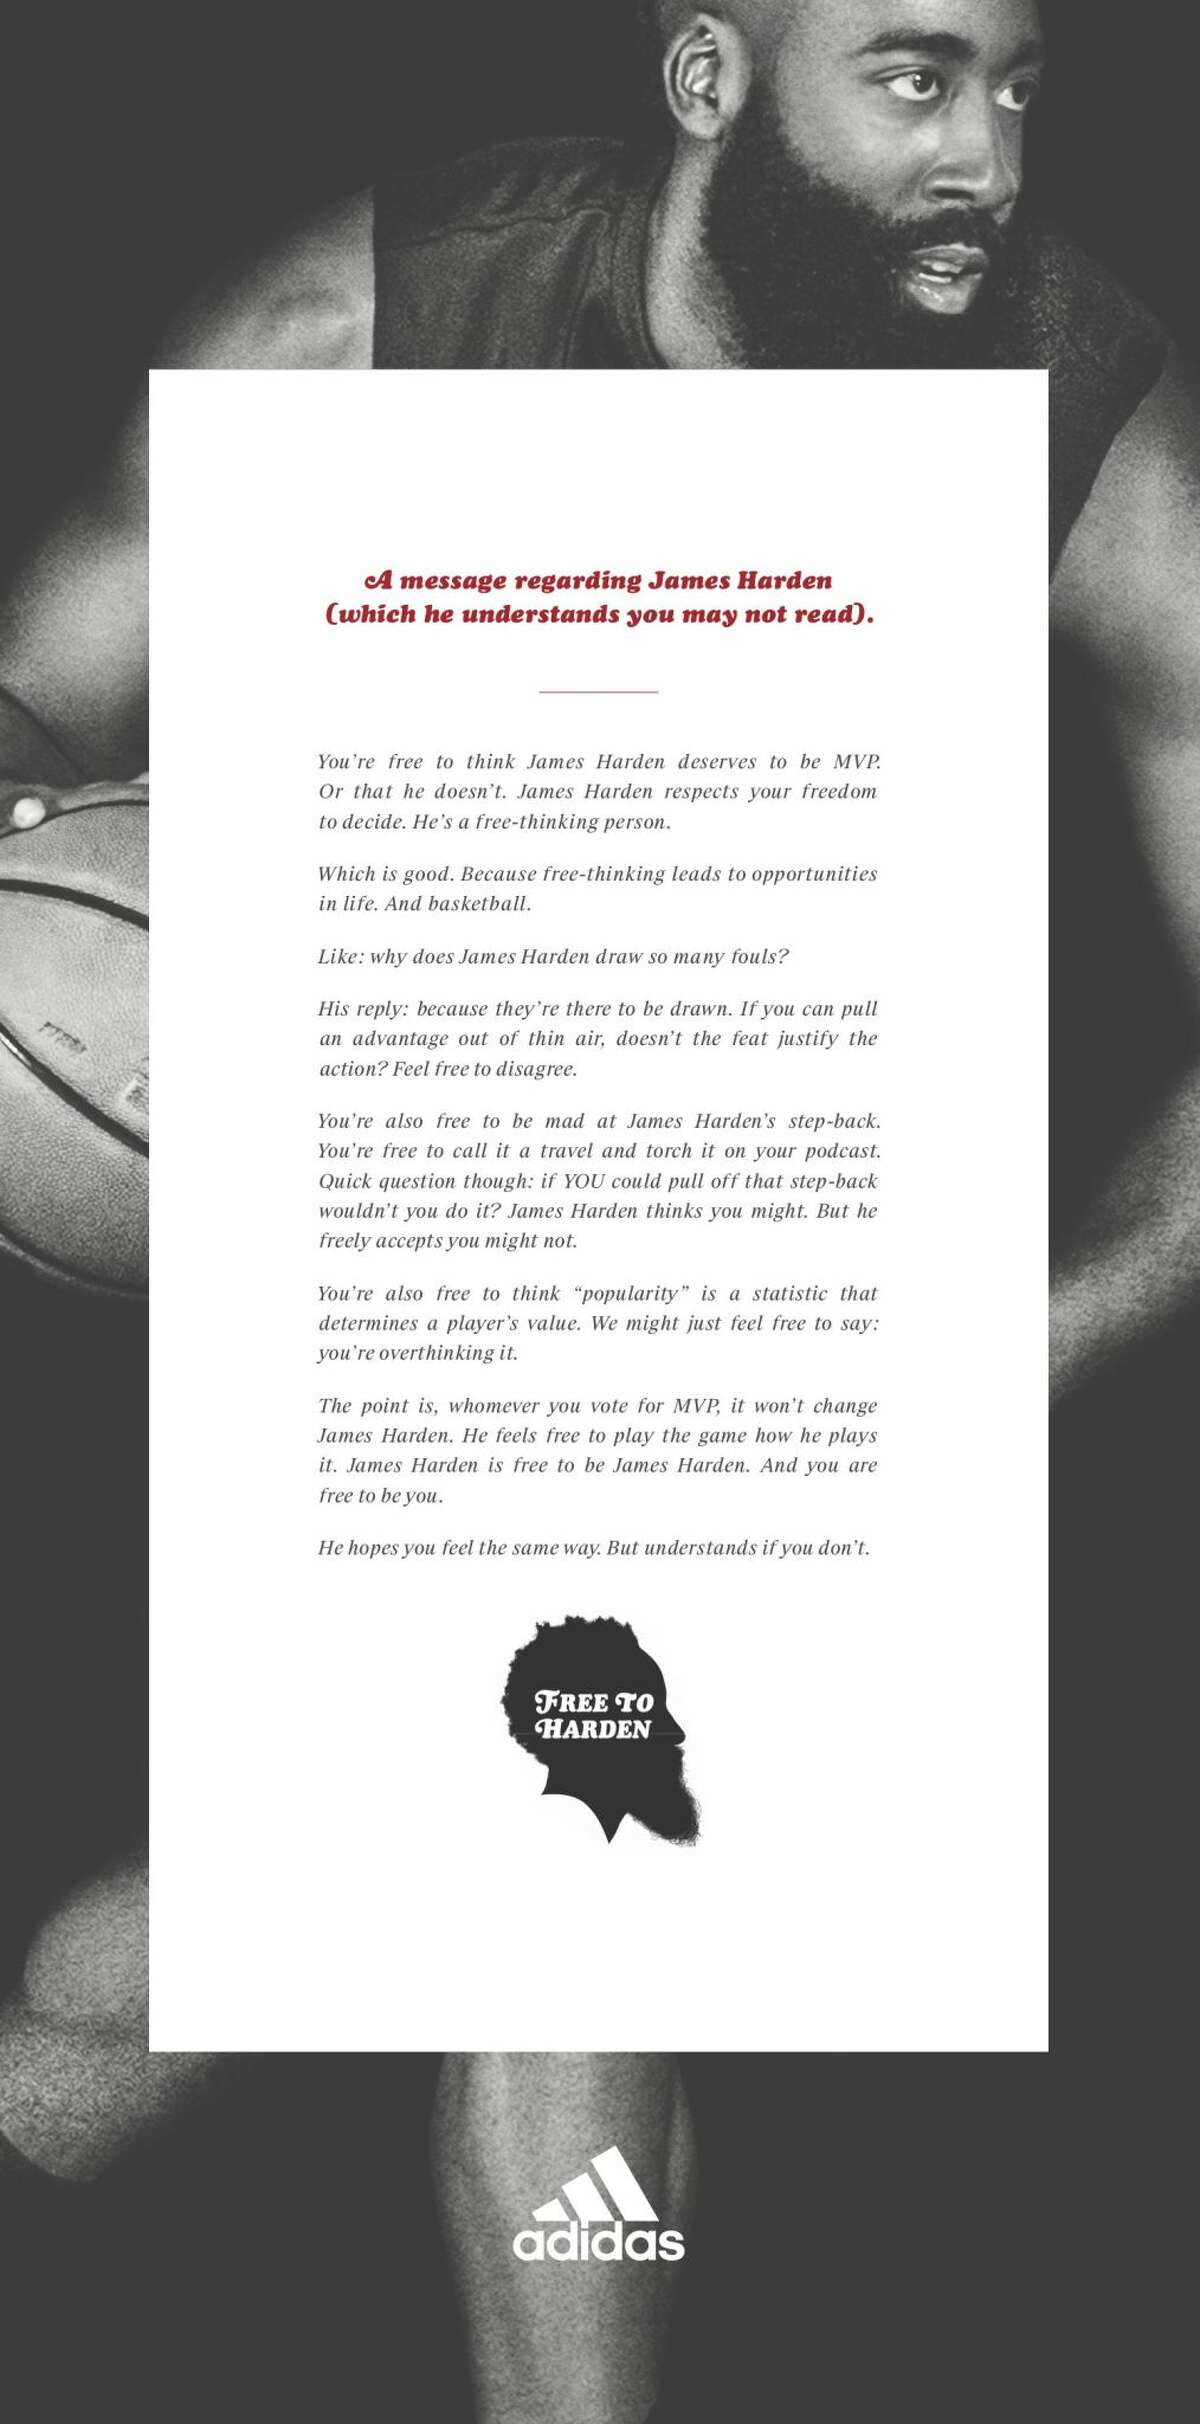 Adidas takes out full-page ad in 